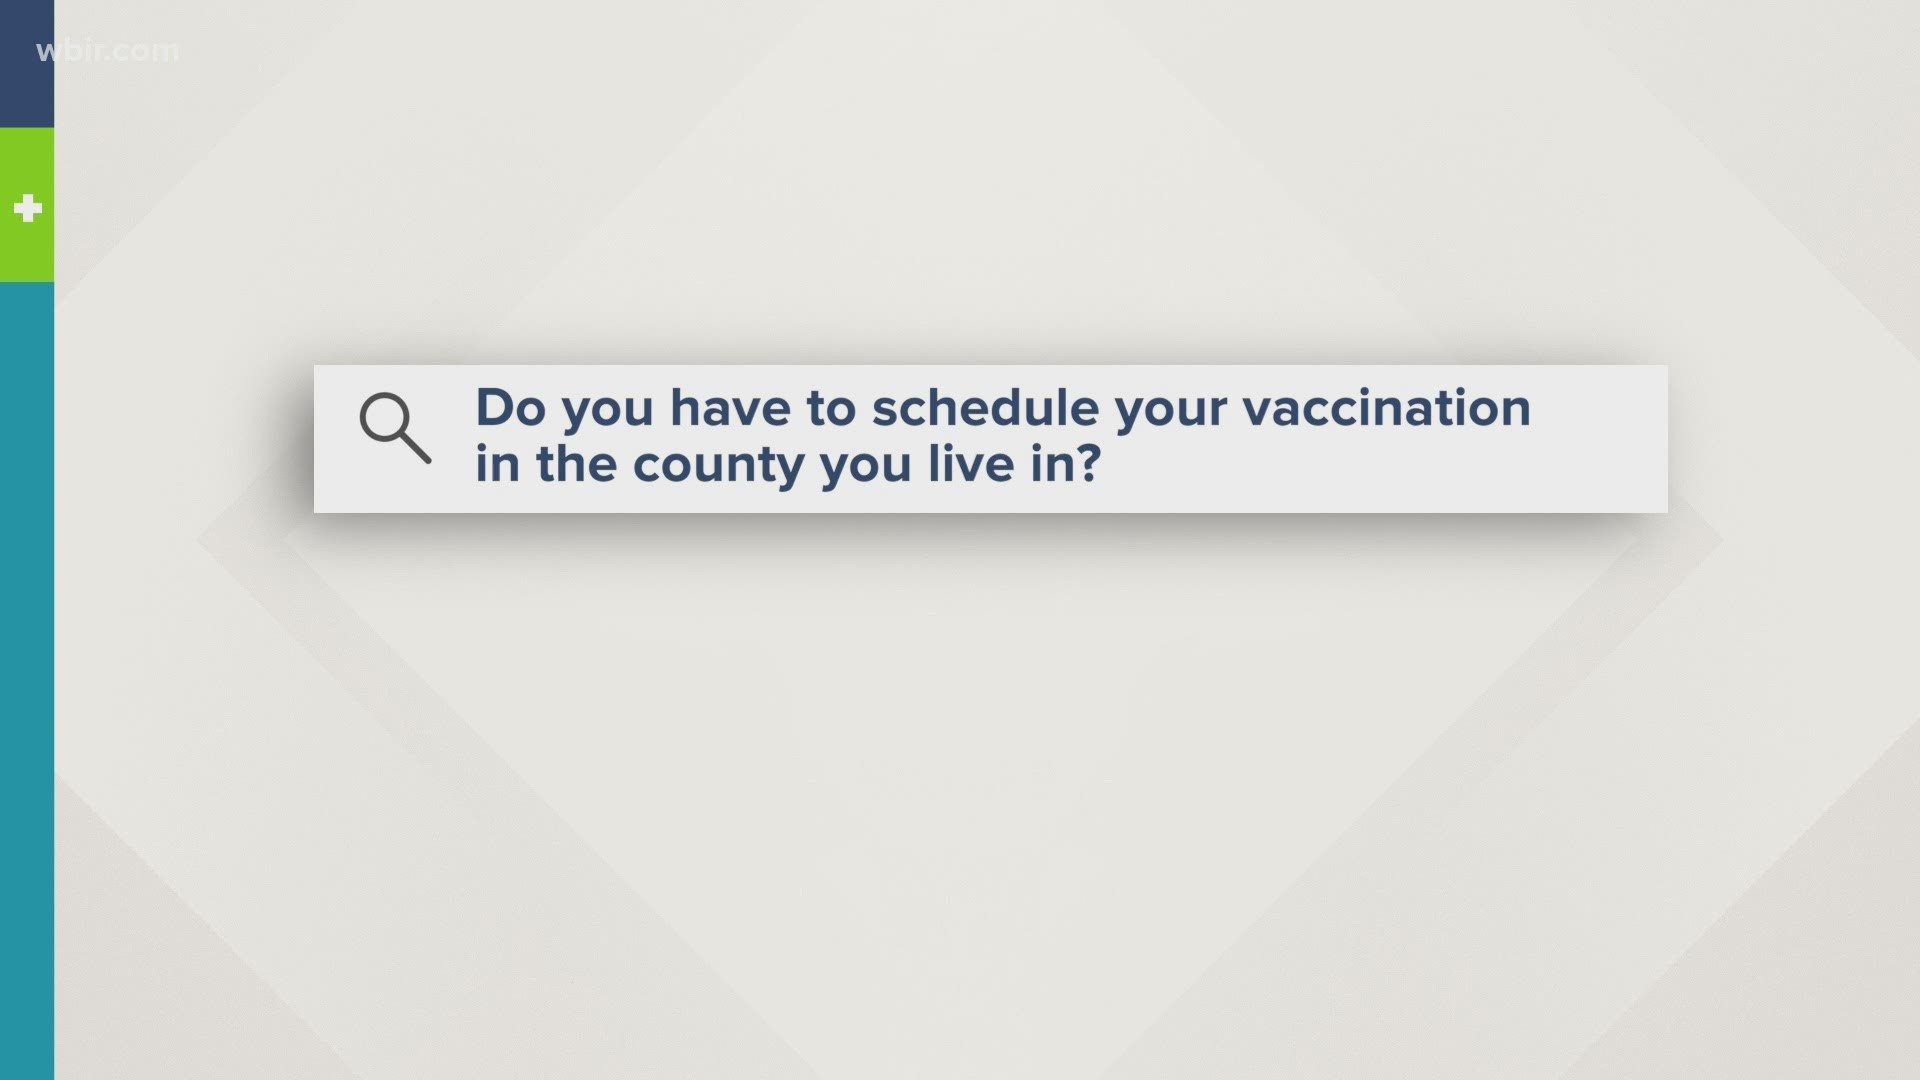 WBIR is answering your questions about the COVID-19 vaccine.